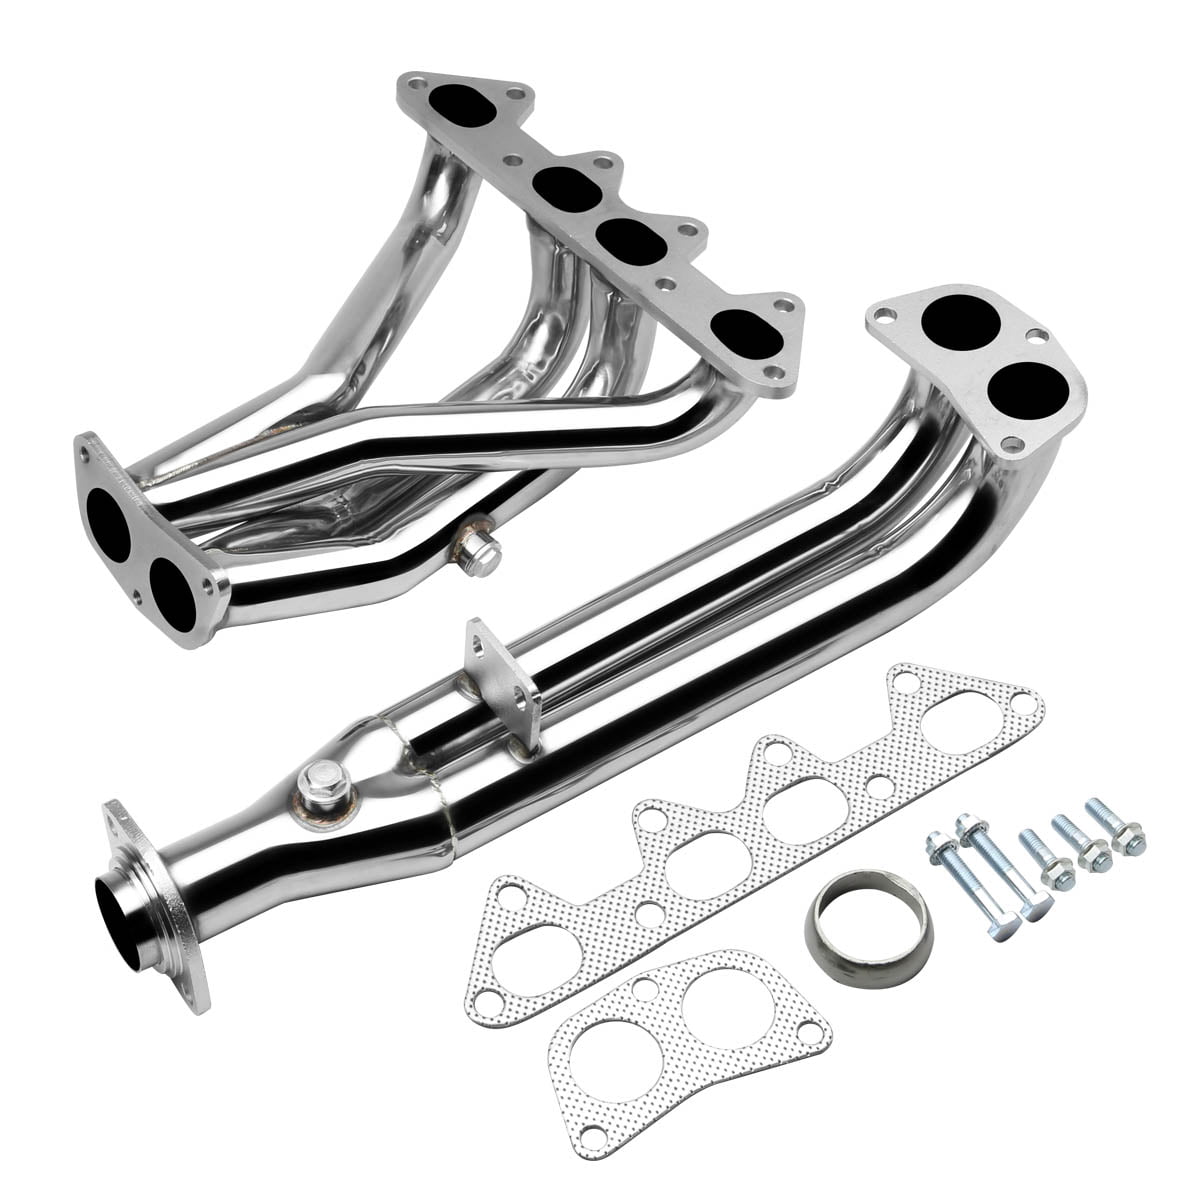 DNA Motoring HDS-HA03-L4 Stainless Steel Exhaust Header Manifold for Honda Accord 